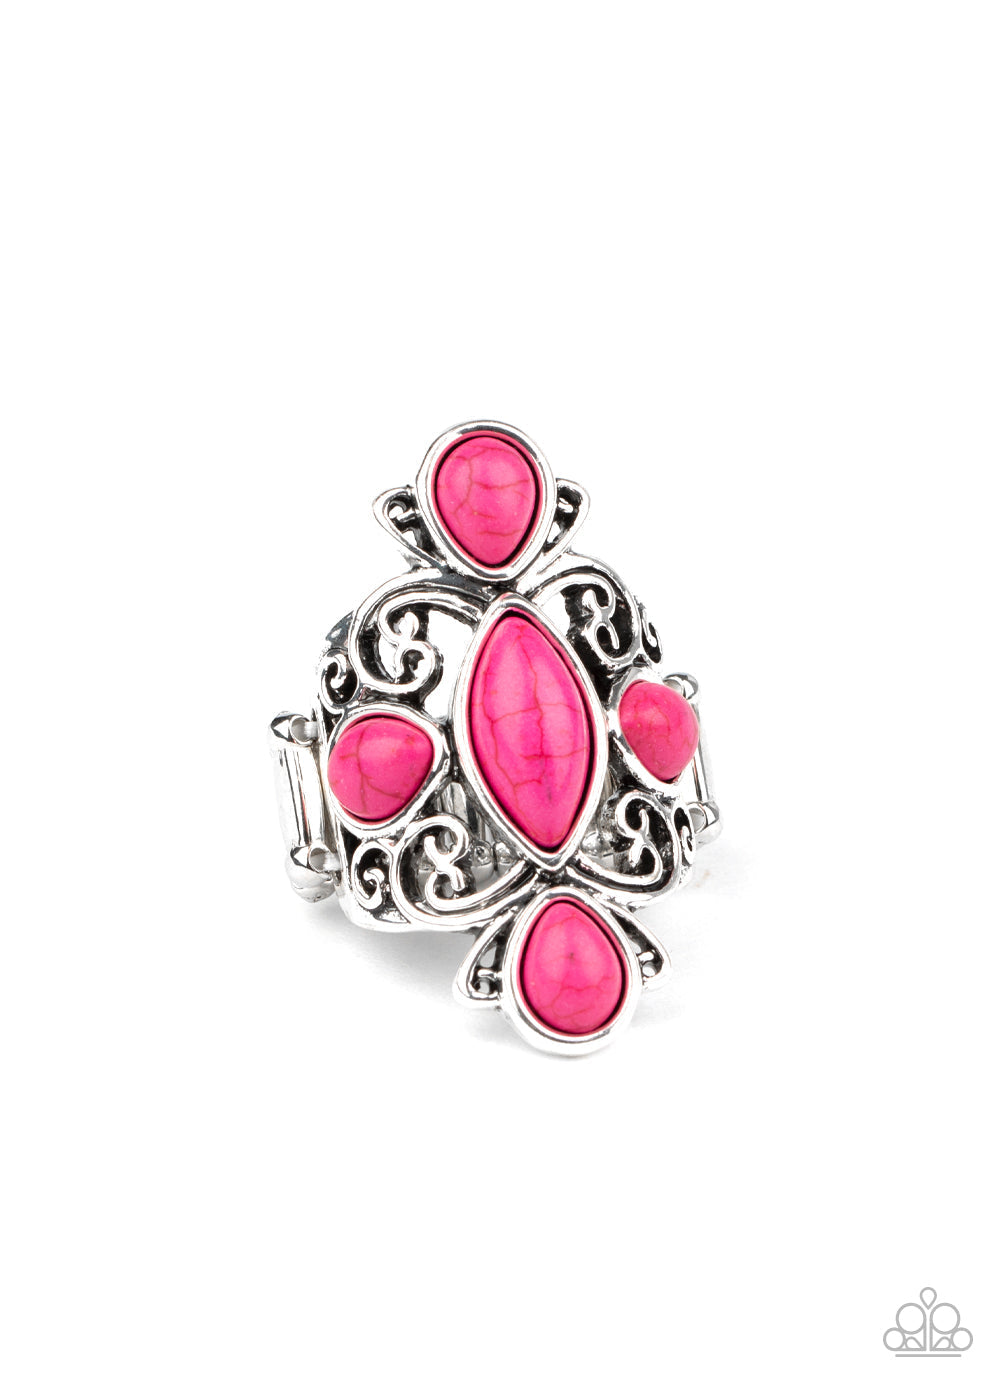 Sahara Sweetheart - Pink and Silver Ring - Paparazzi Accessories - Swirling silver filigree delicately curls around an array of pink stones, creating a colorfully rustic centerpiece atop the finger. Features a stretchy band for a flexible fit. Sold as one individual ring.